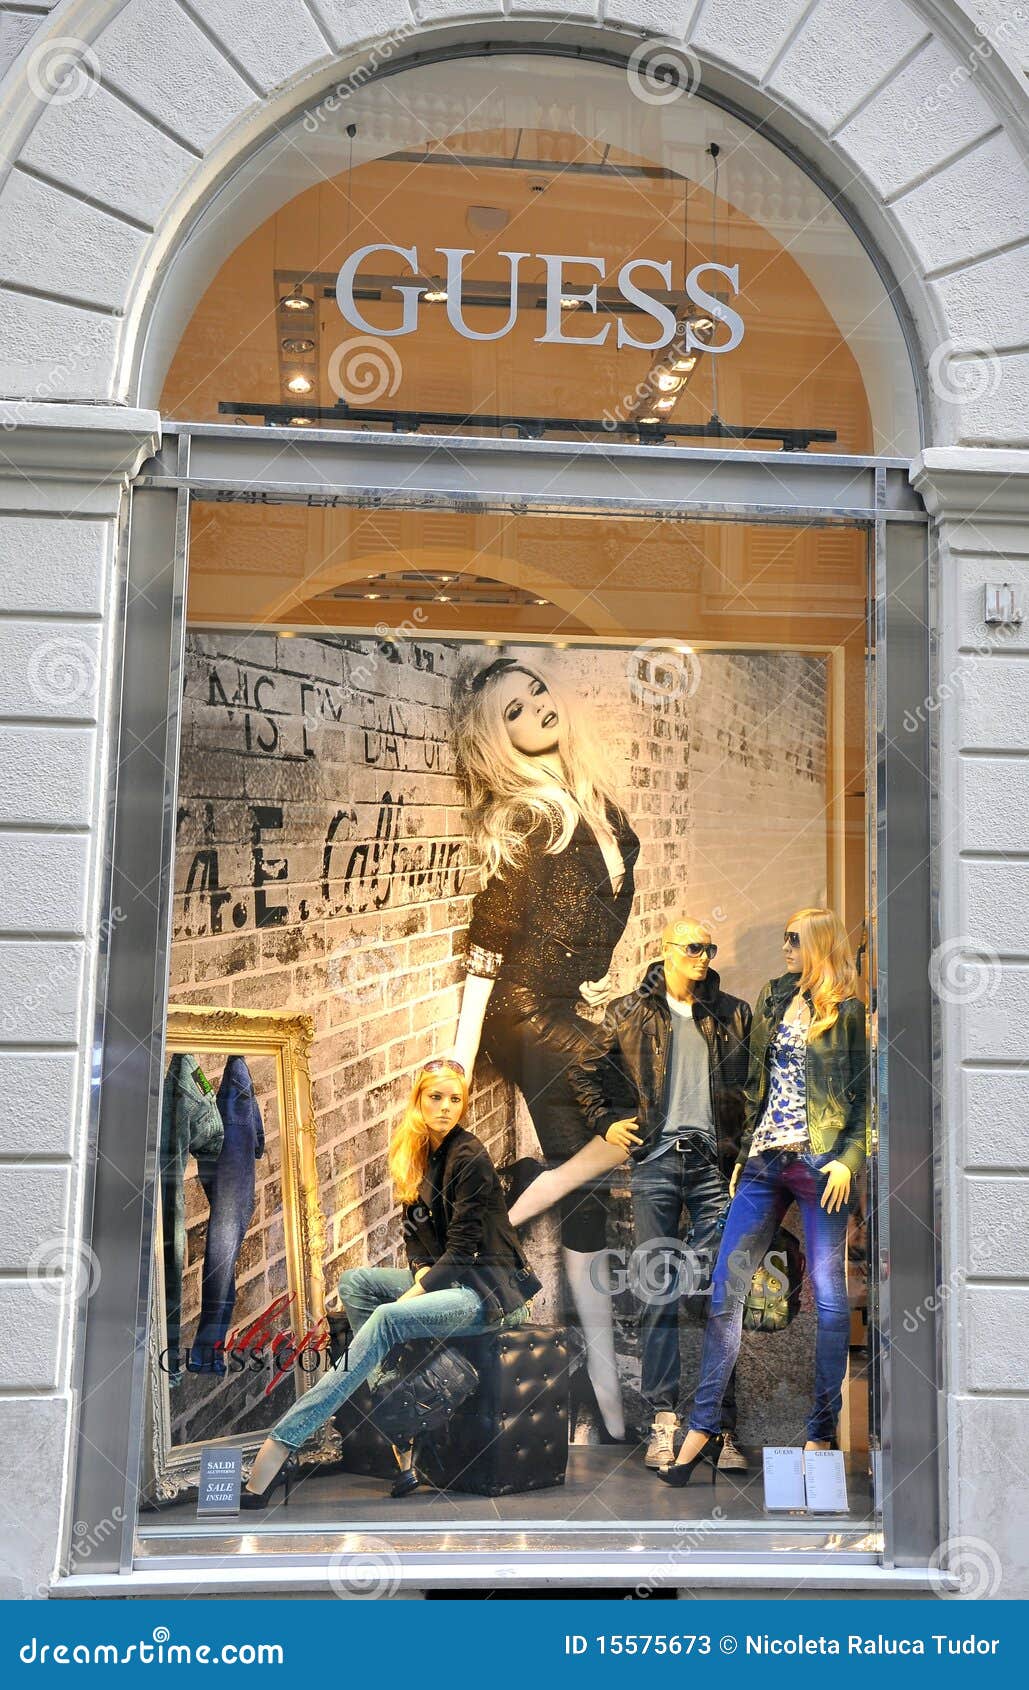 Guess Fashion Shop in Italy Editorial Stock Photo - Image famous, guess: 15575673